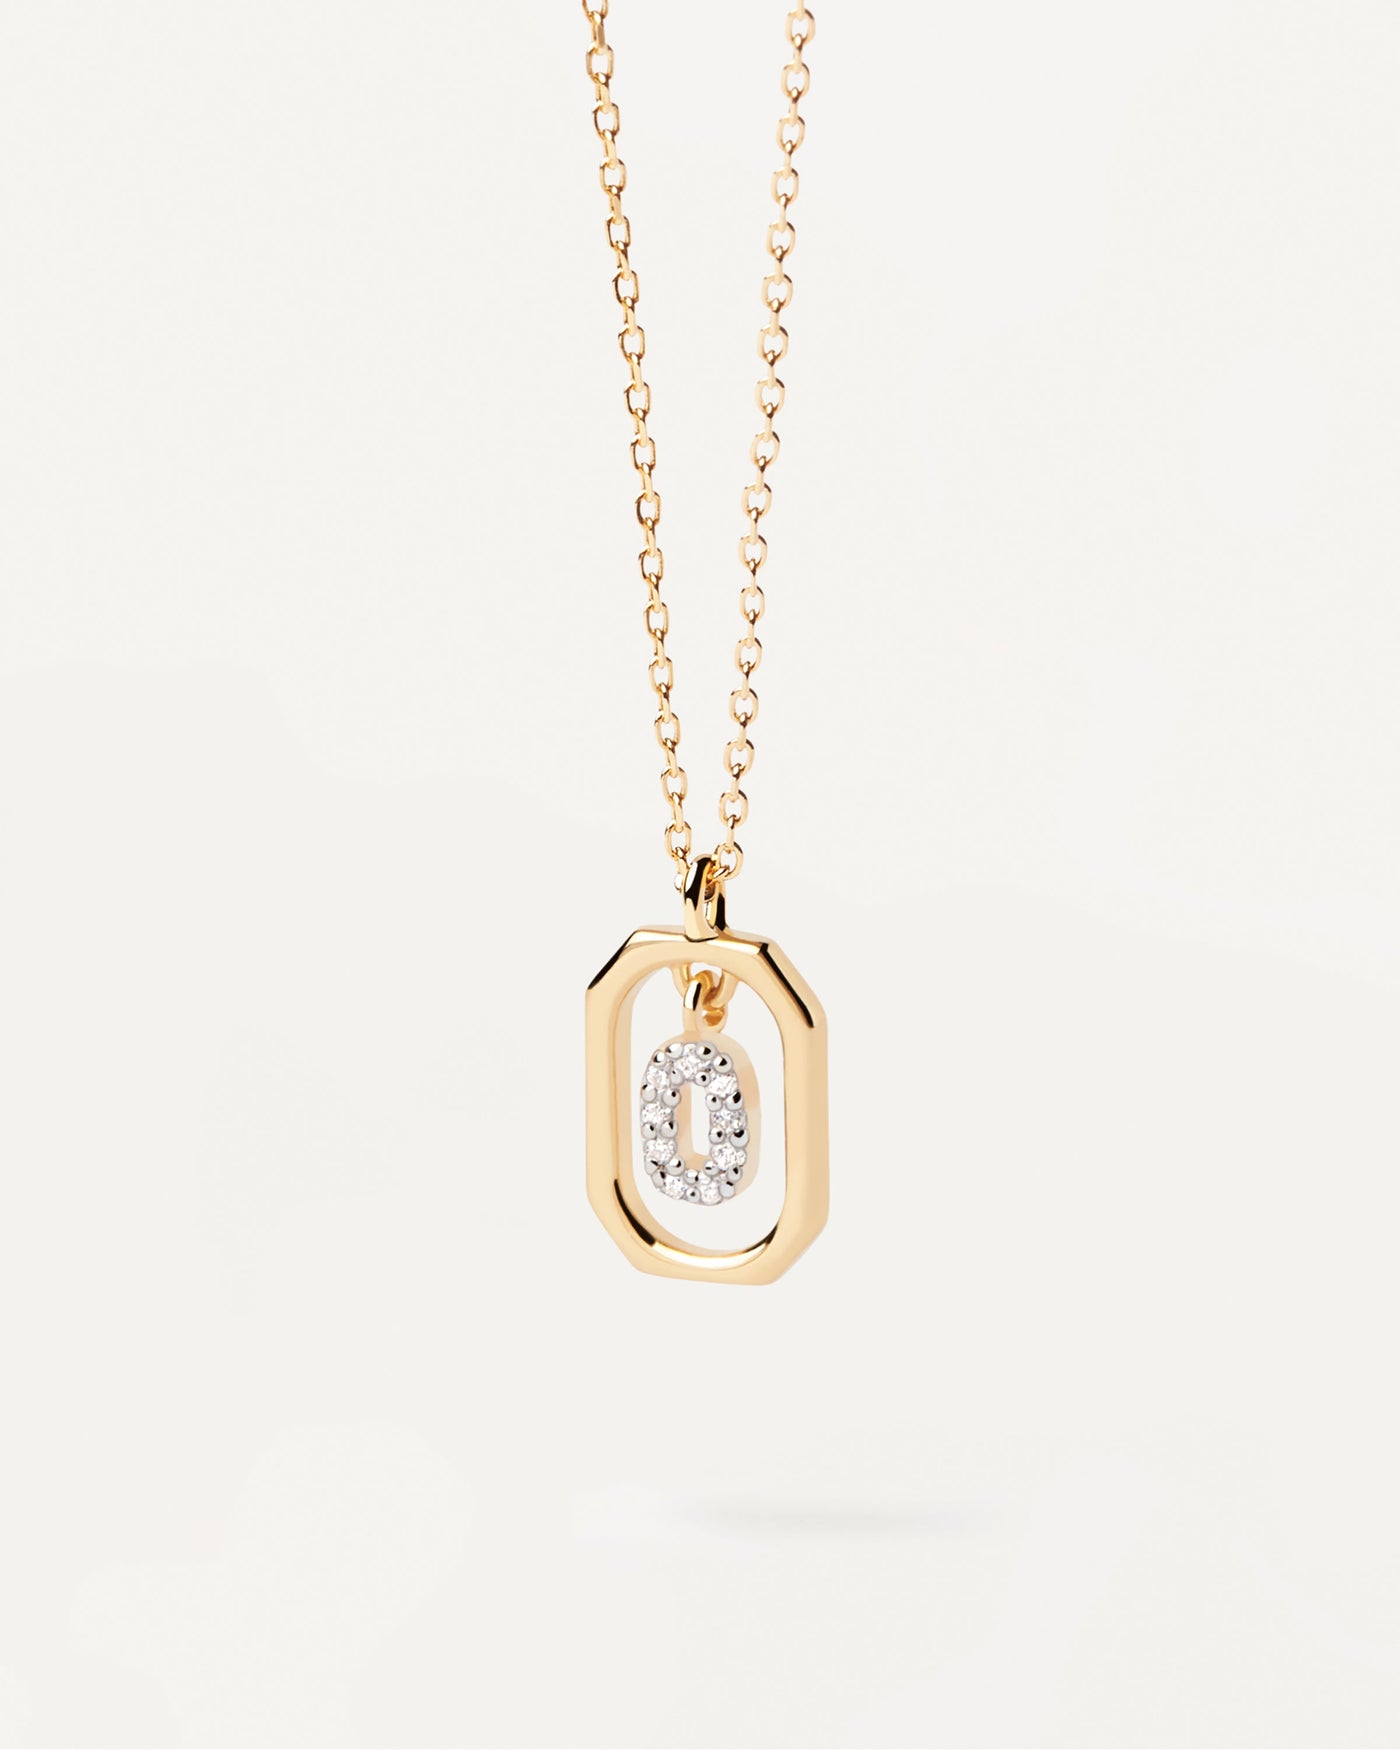 2023 Selection | Mini Letter O Necklace. Small initial O necklace in zirconia inside gold-plated silver octagonal pendant. Get the latest arrival from PDPAOLA. Place your order safely and get this Best Seller. Free Shipping.